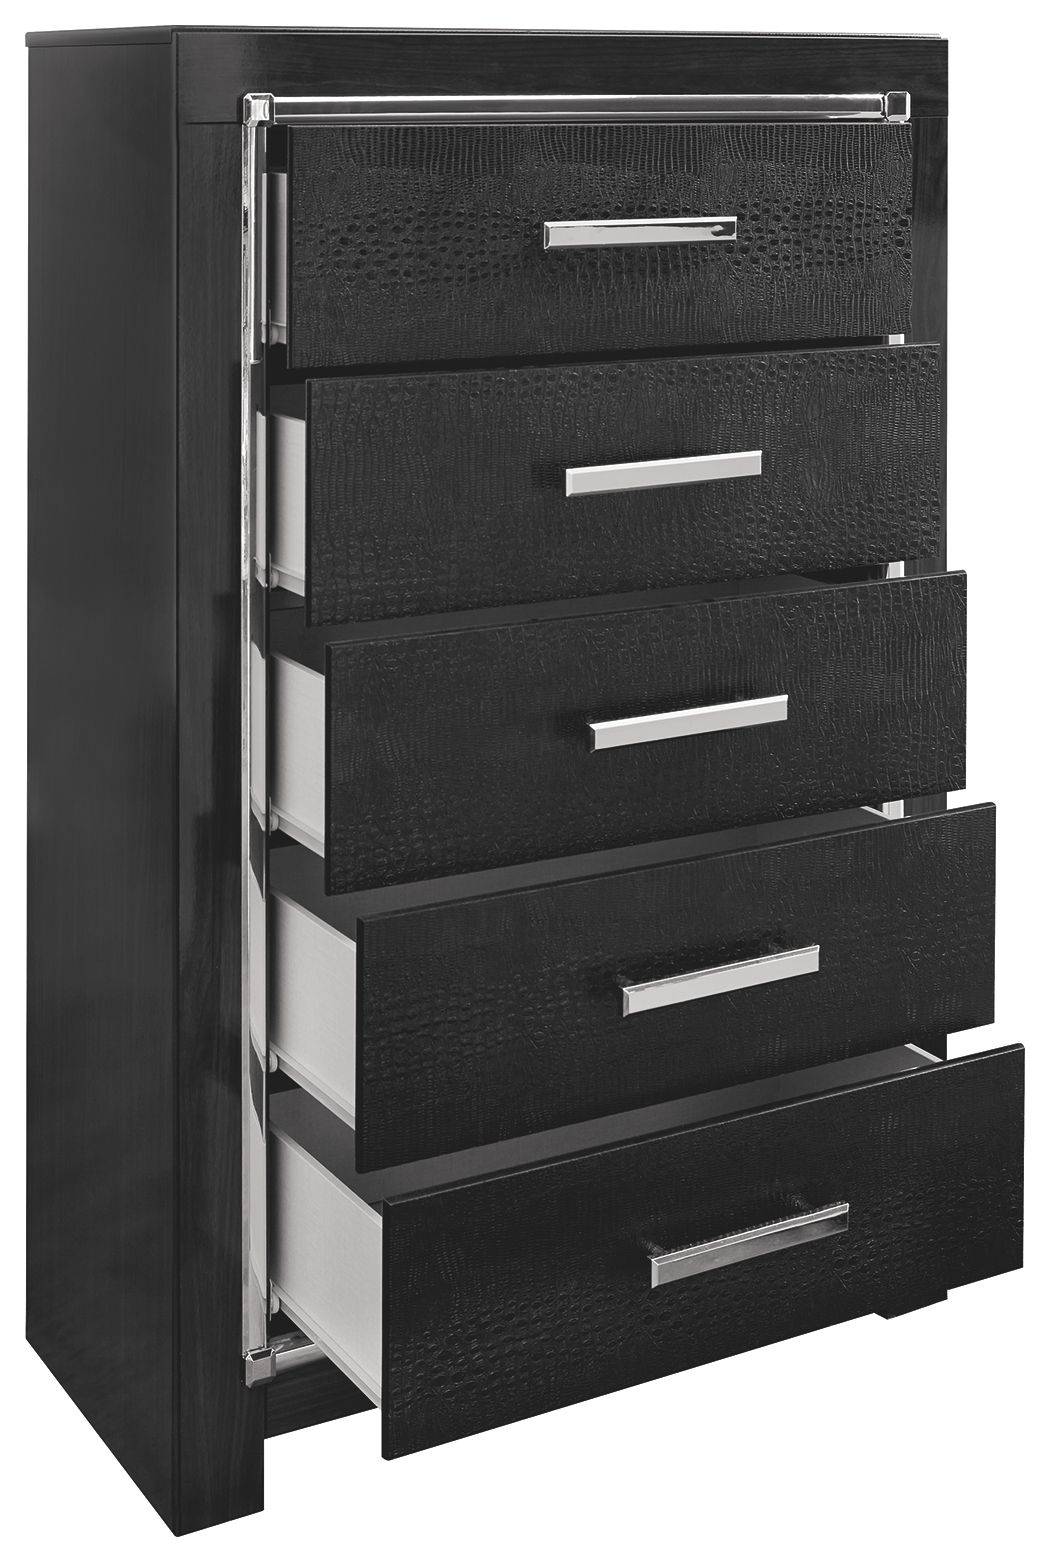 Kaydell - Black - Five Drawer Chest - Tony's Home Furnishings